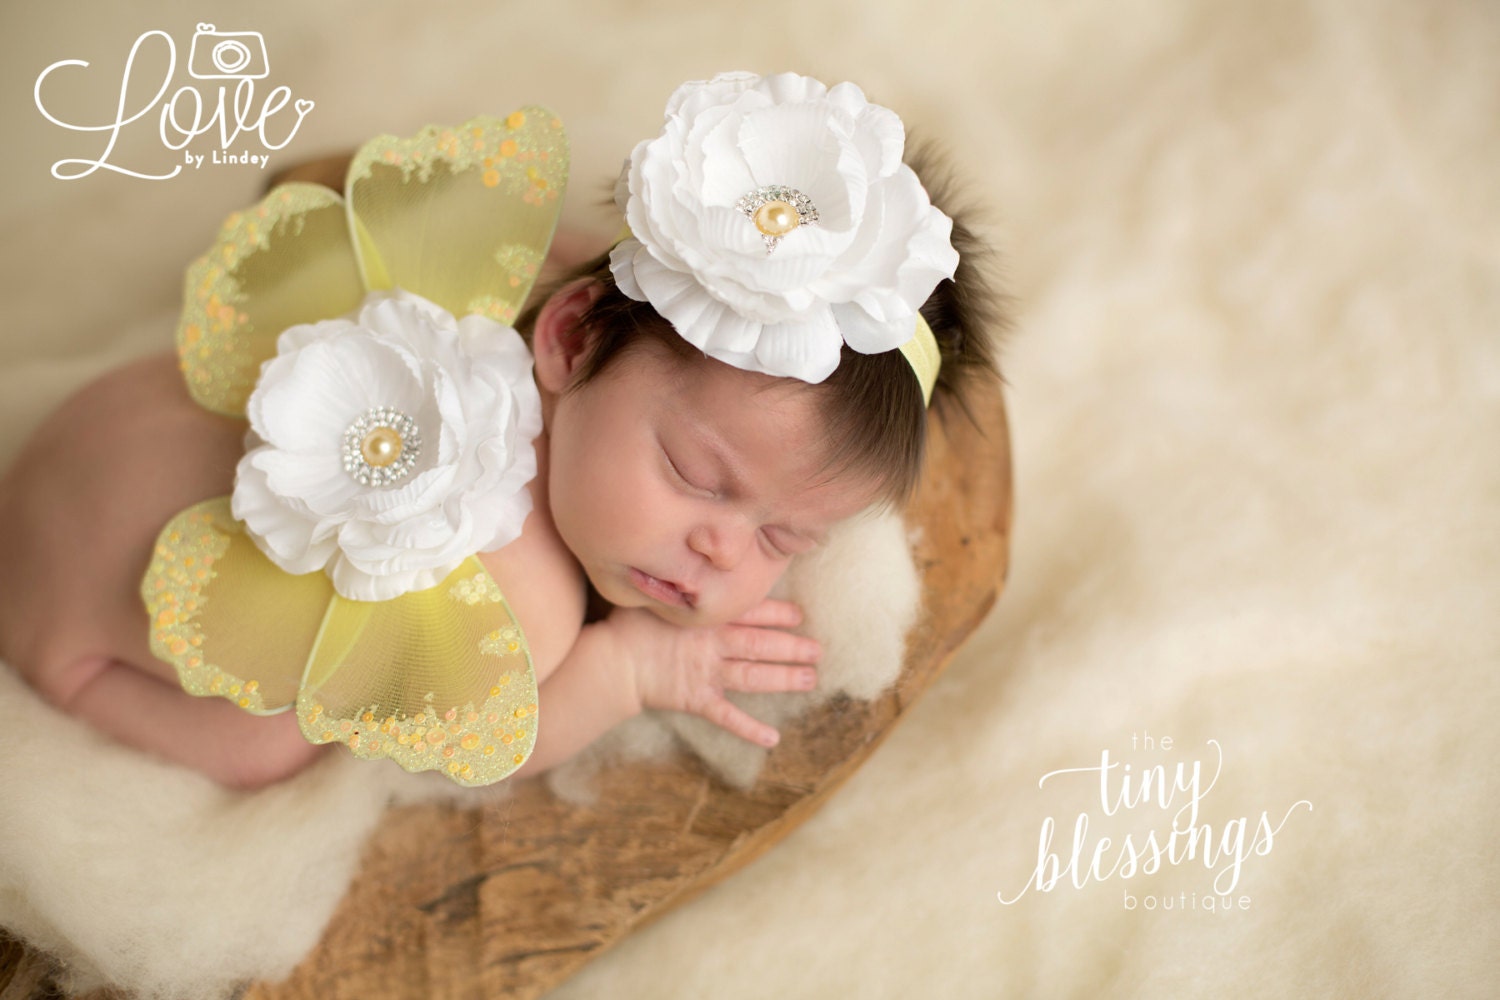 Yellow and White Butterfly Wing Set / Newborn Wings / Newborn Wing Prop / Baby Girl Headband / Newborn Photo Prop / Newborn Butterfly Wings